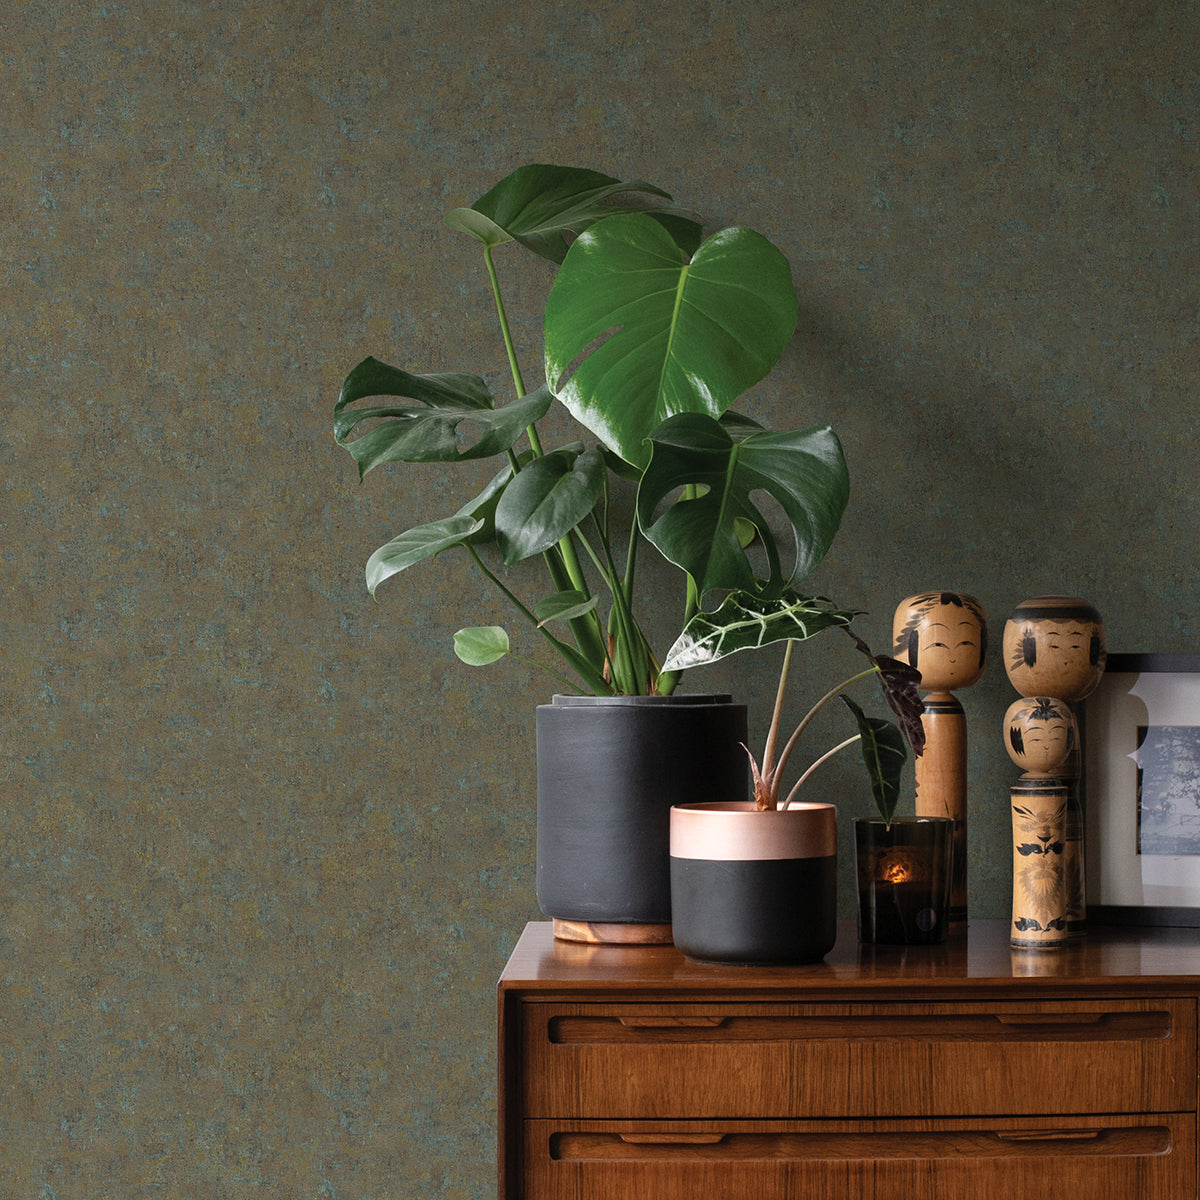 Ryu Multicolor Cement Texture Wallpaper  | Brewster Wallcovering